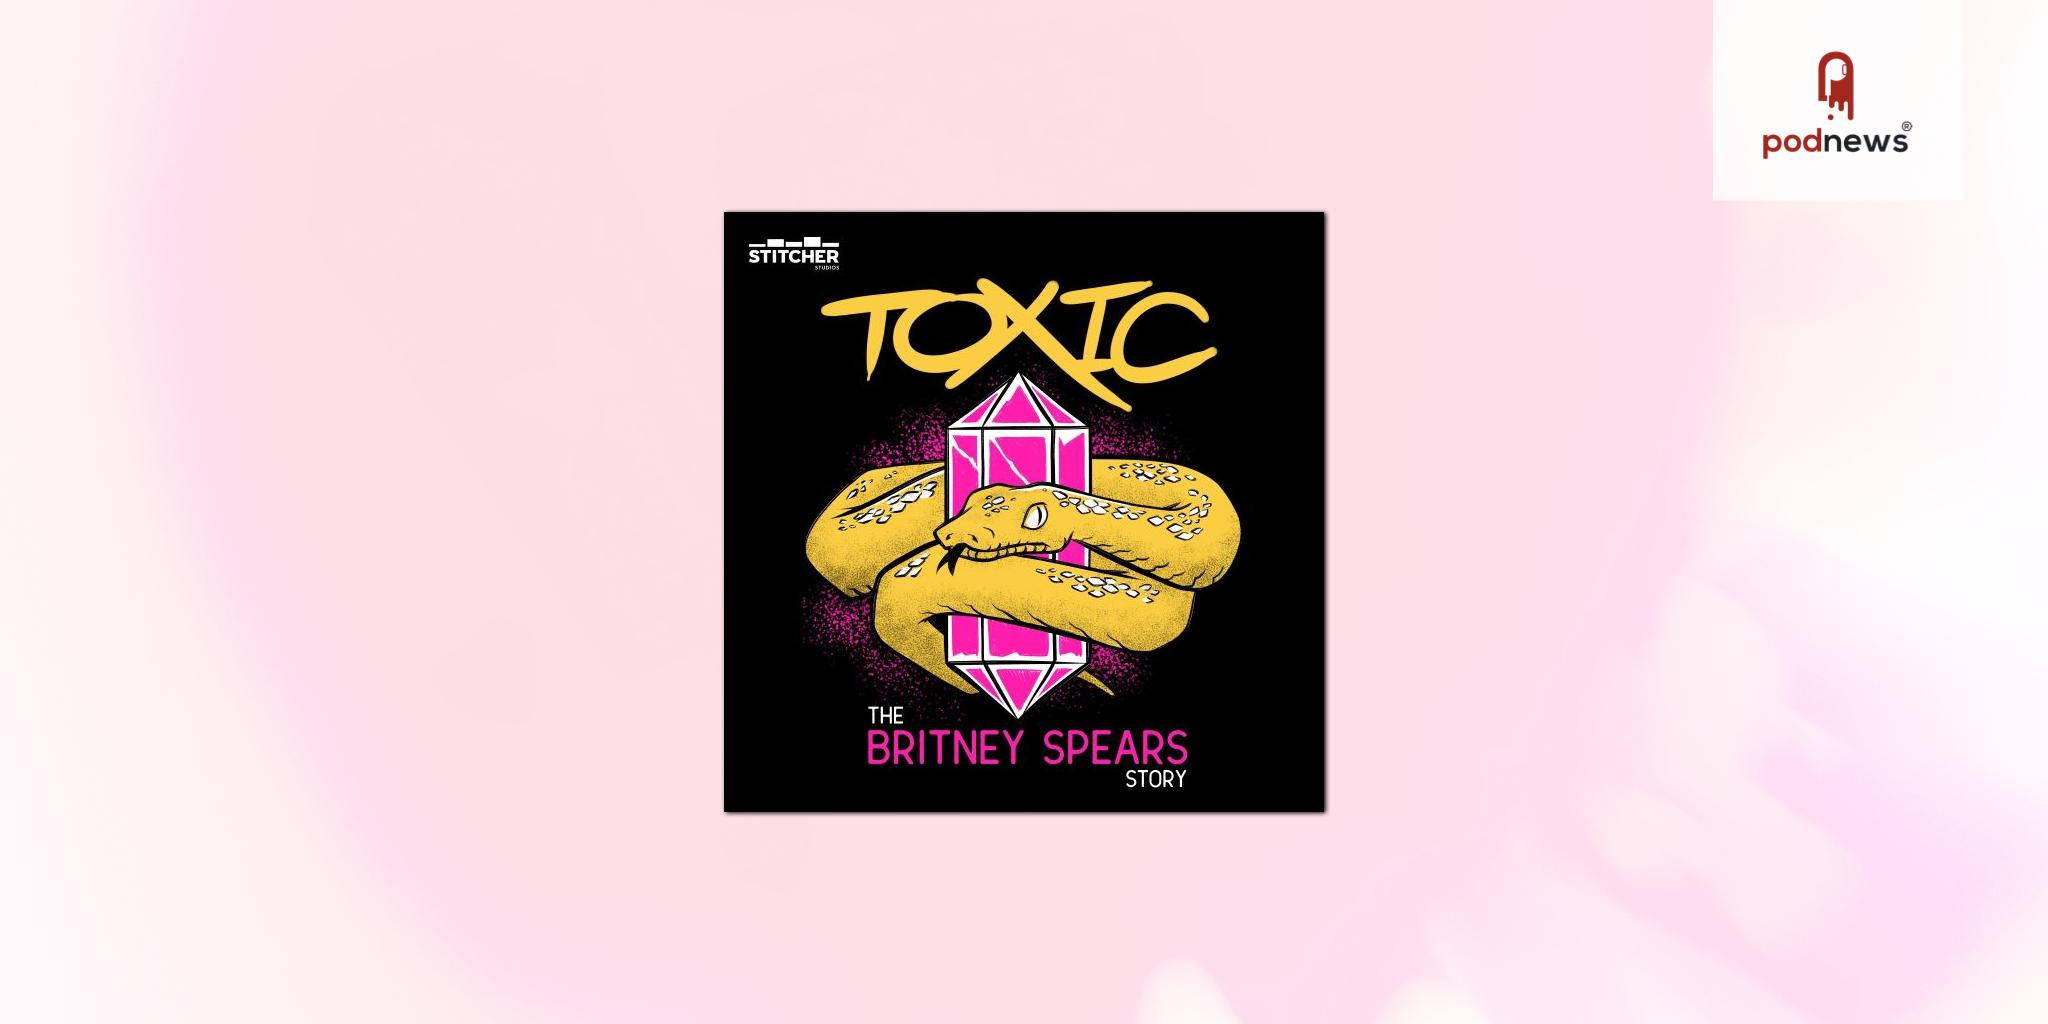 Witness Docs announces July 7 release for new investigative podcast Toxic: The Britney Spears Story